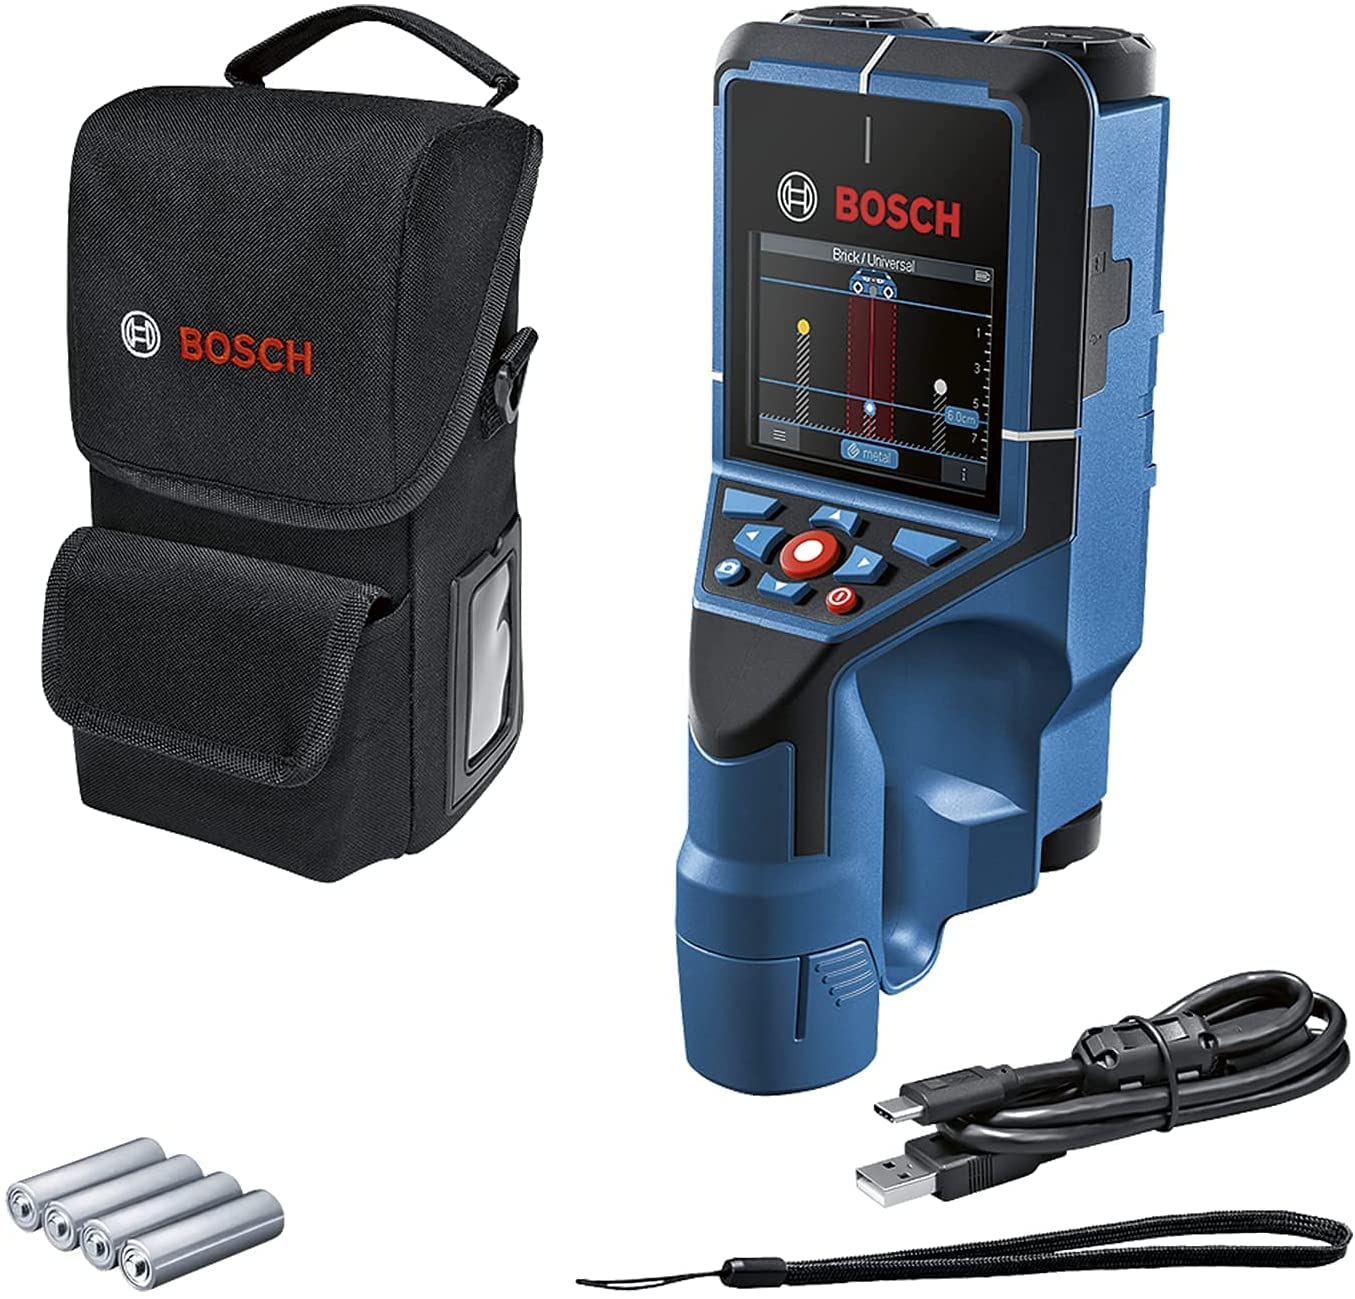 Bosch D-Tect 200 C Professional Detector for Metals, Woods and Pipes 06010816K0